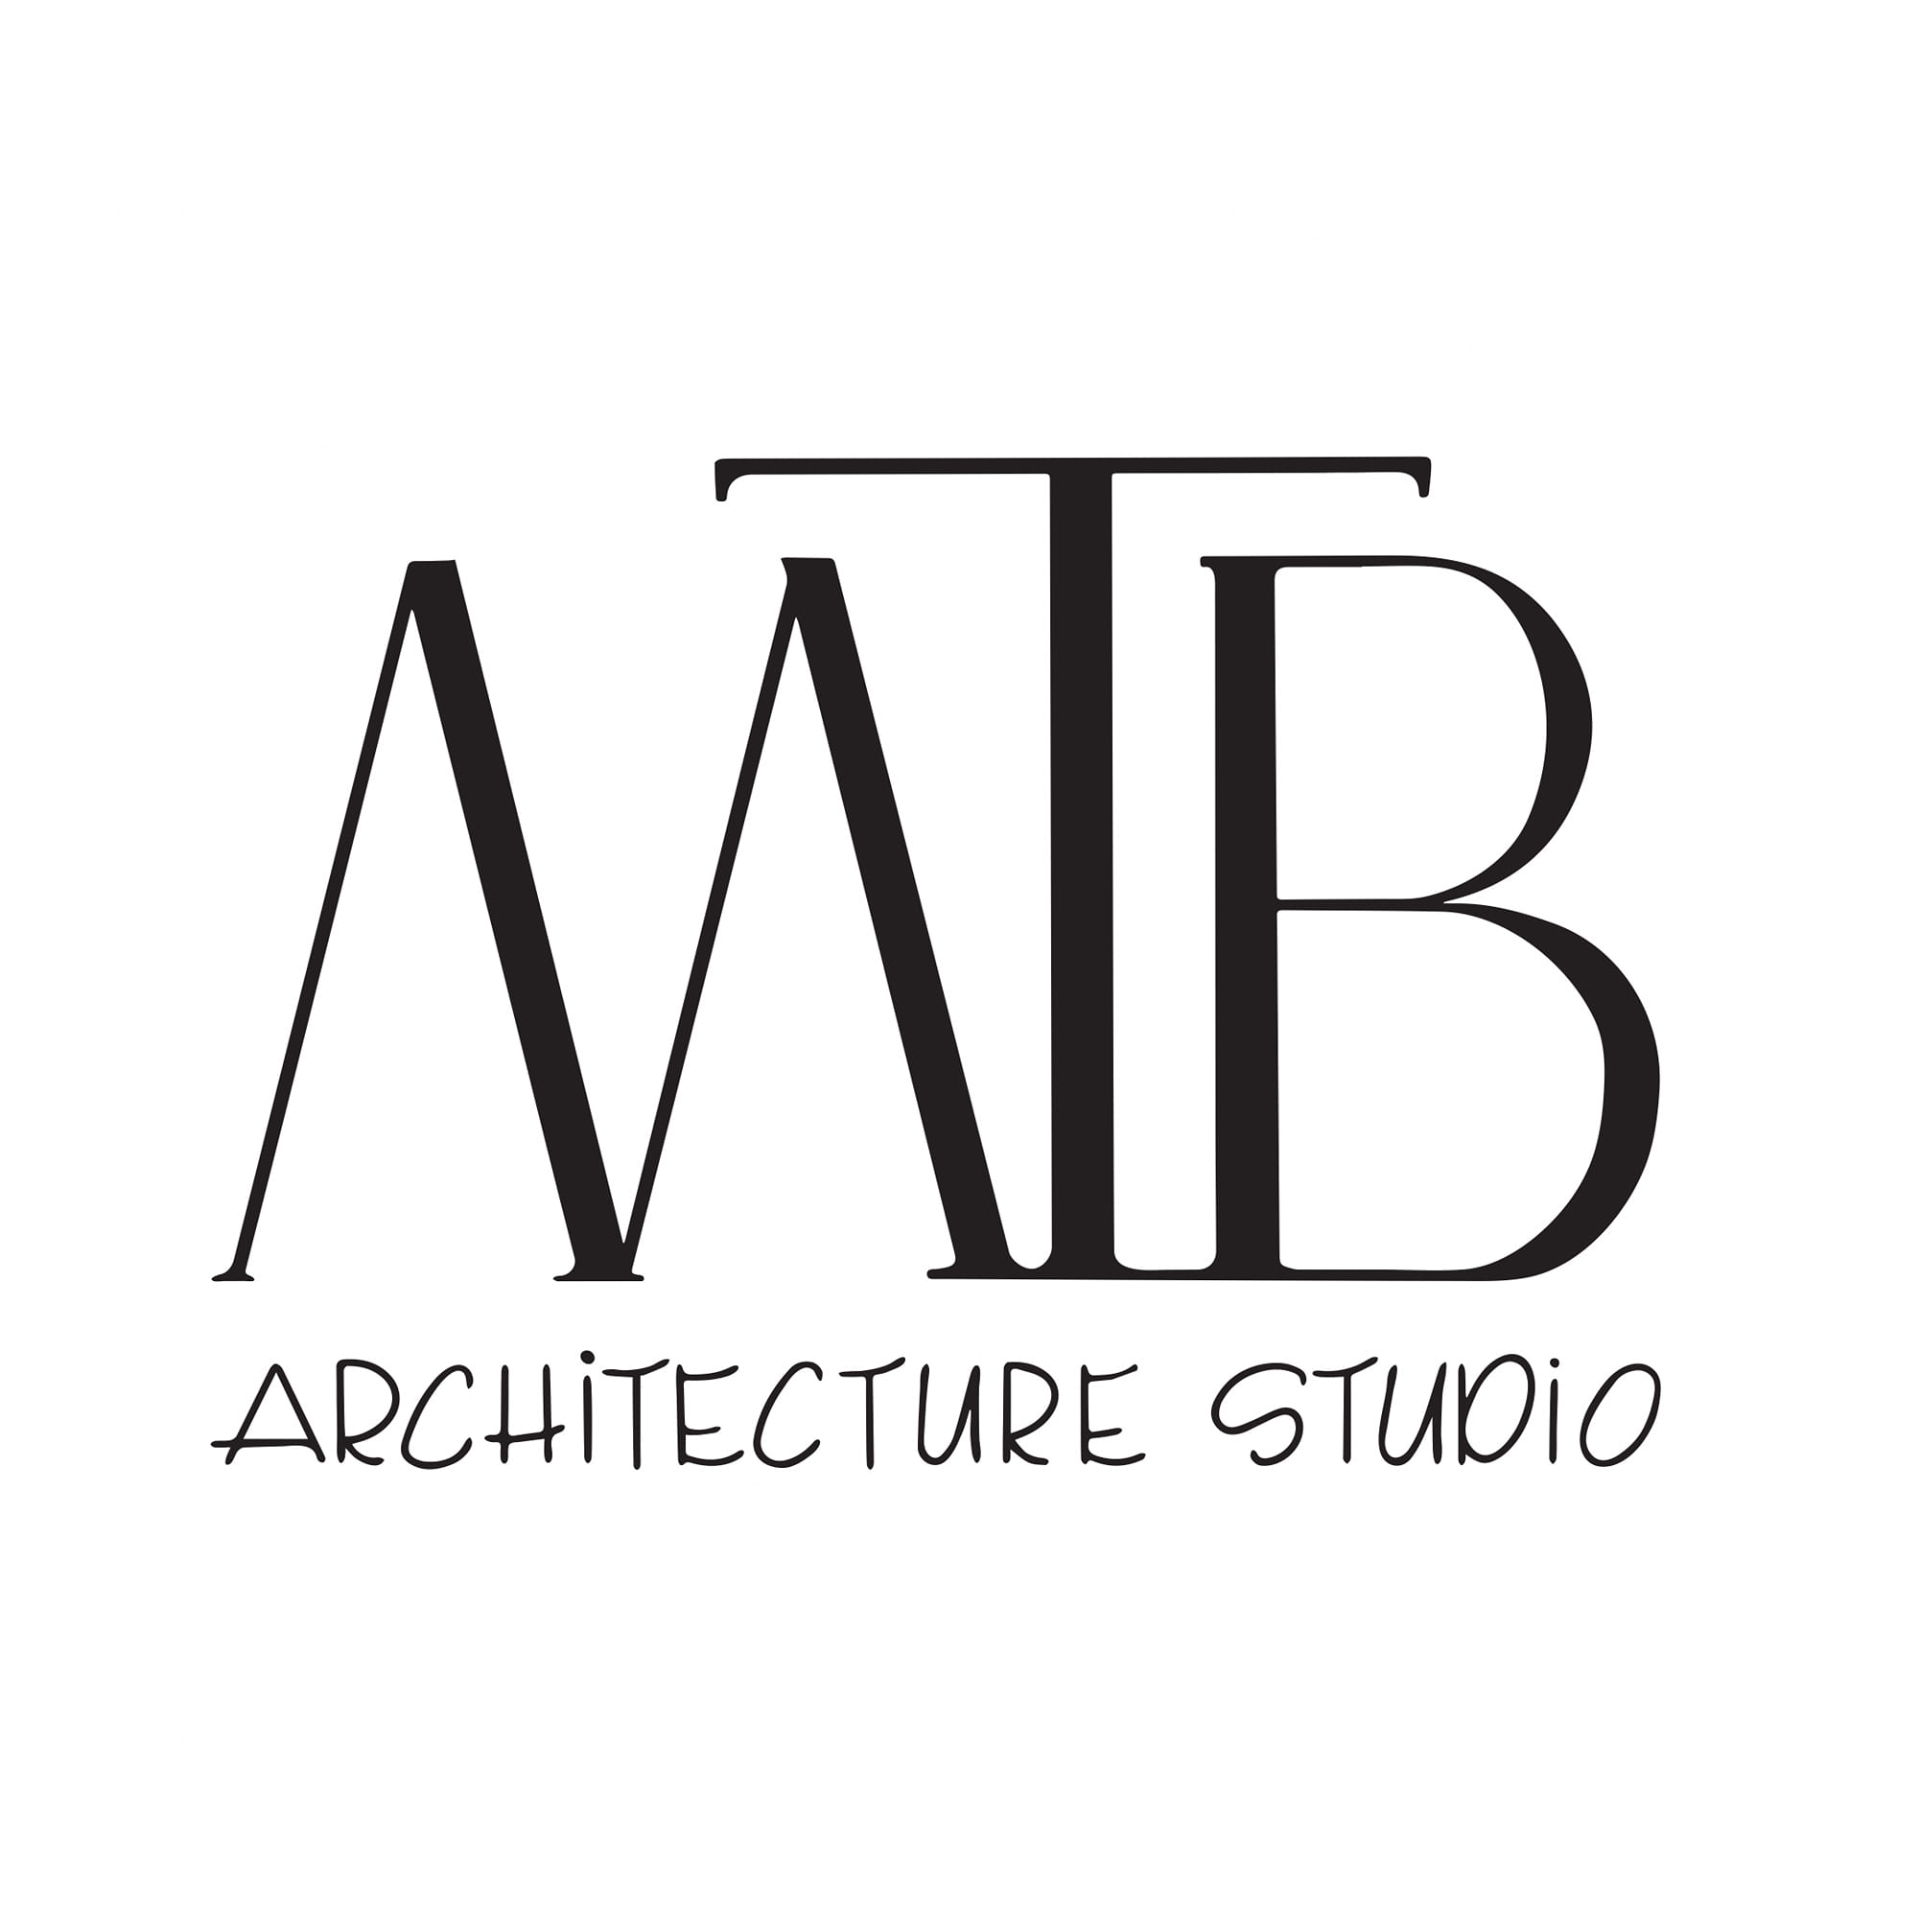 More Than Buildings Architecture and Design Studio|Accounting Services|Professional Services